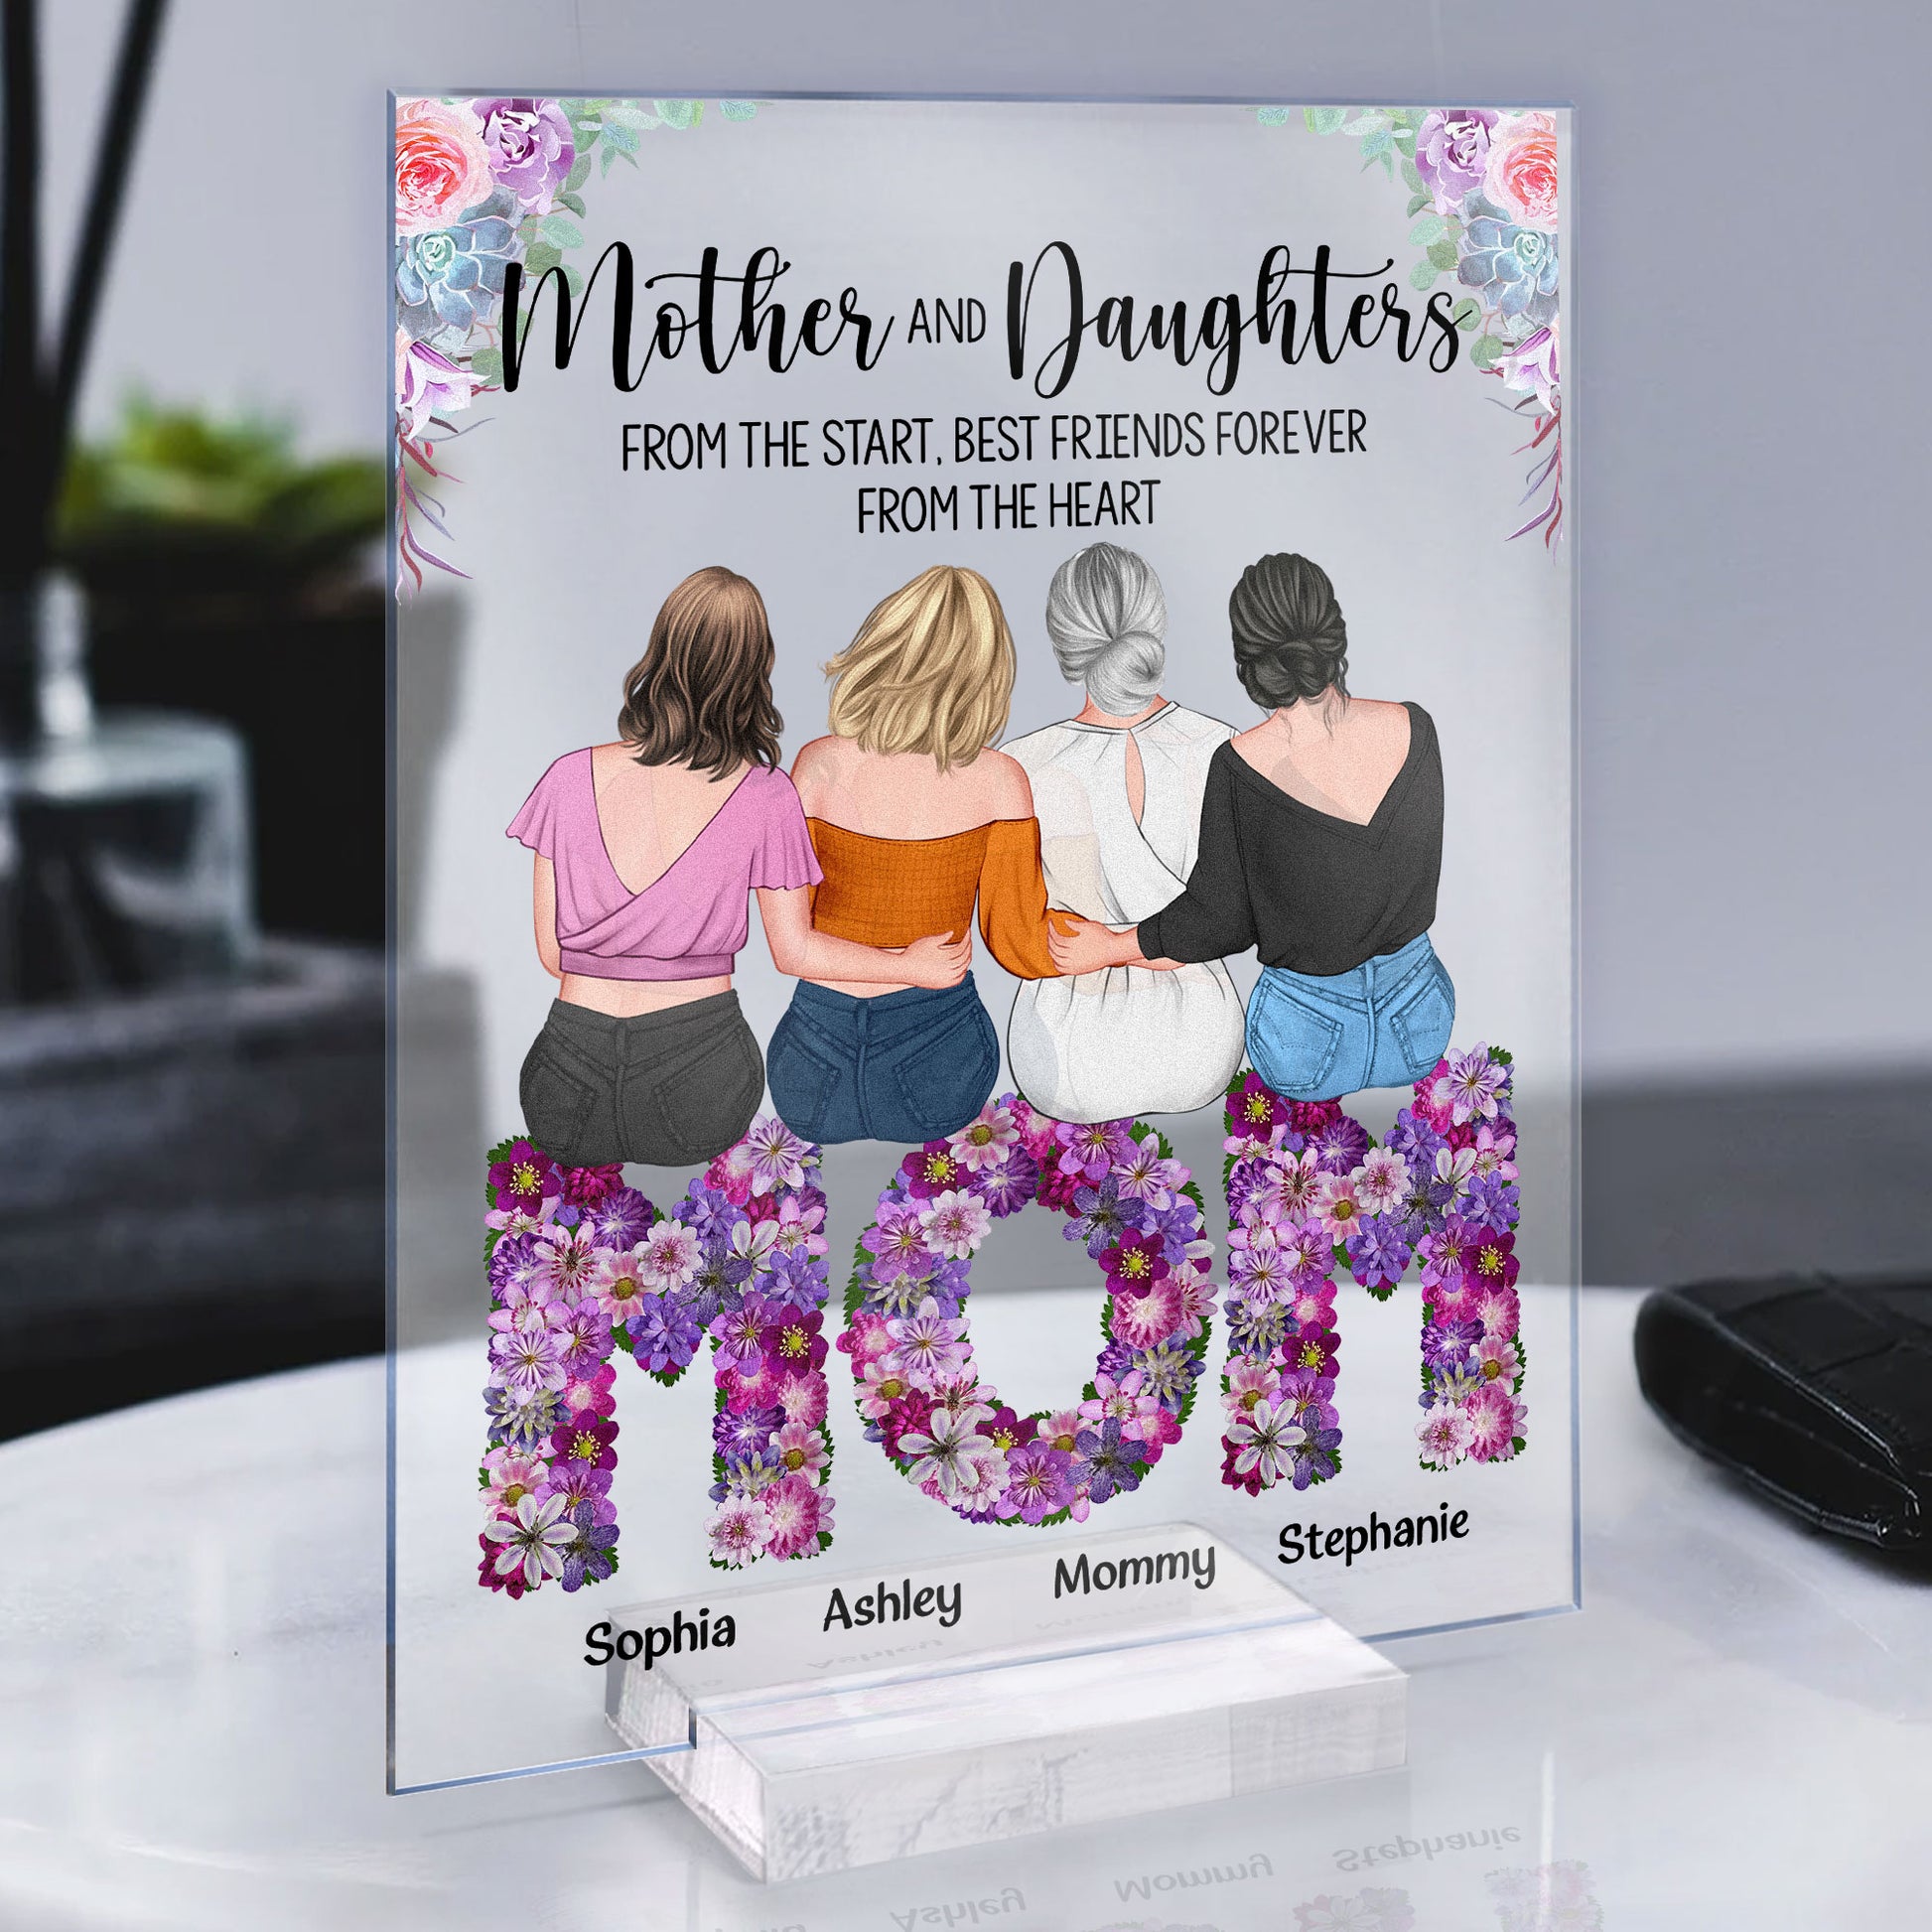 Mother And Daughters - Best Friends Forever From The Heart - Personali –  Macorner